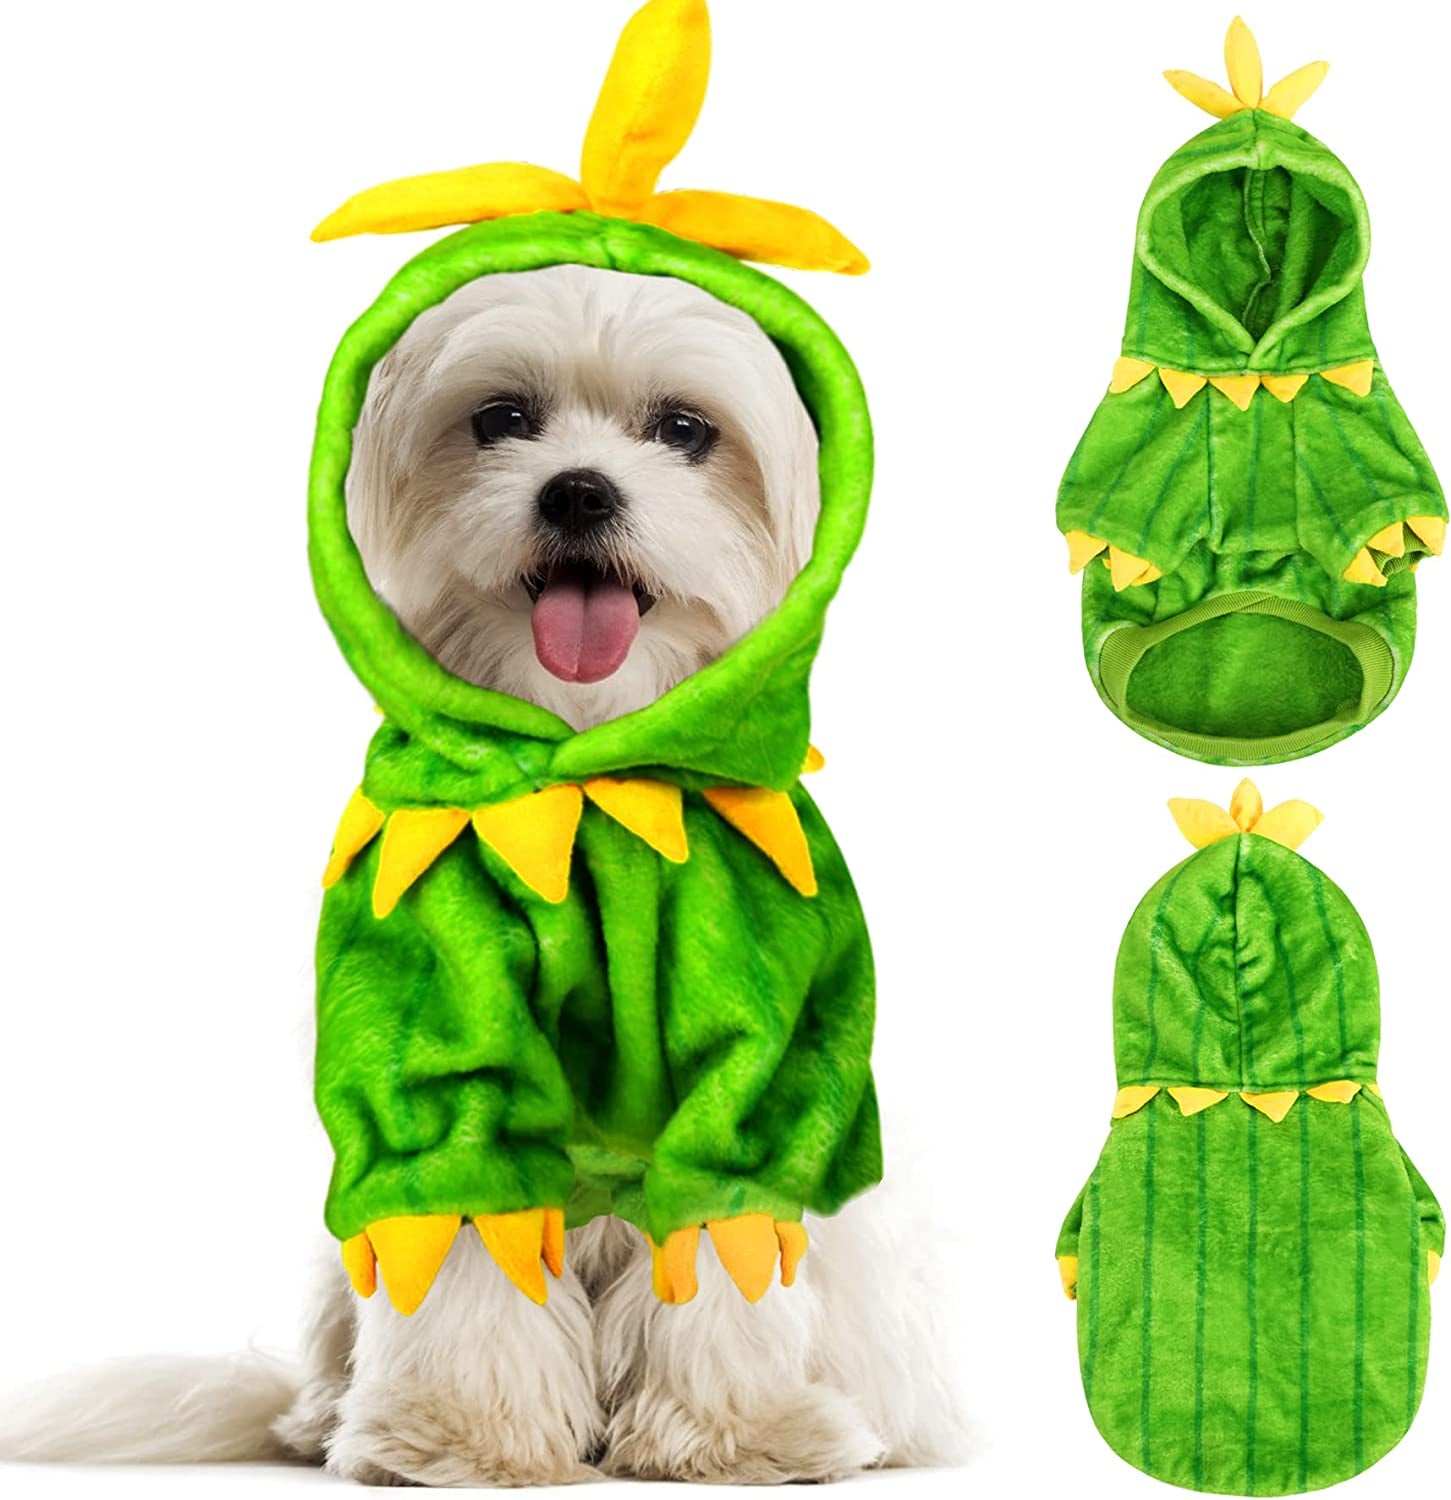 MIGOHI Dog Halloween Costumes, Cute Green Cactus Shape Dog Hoodie Coat for Daily Wear Outdoor Walking, Puppy Funny Cosplay Adorable Coral Velvet Hooded Pajamas for Small Medium Dogs